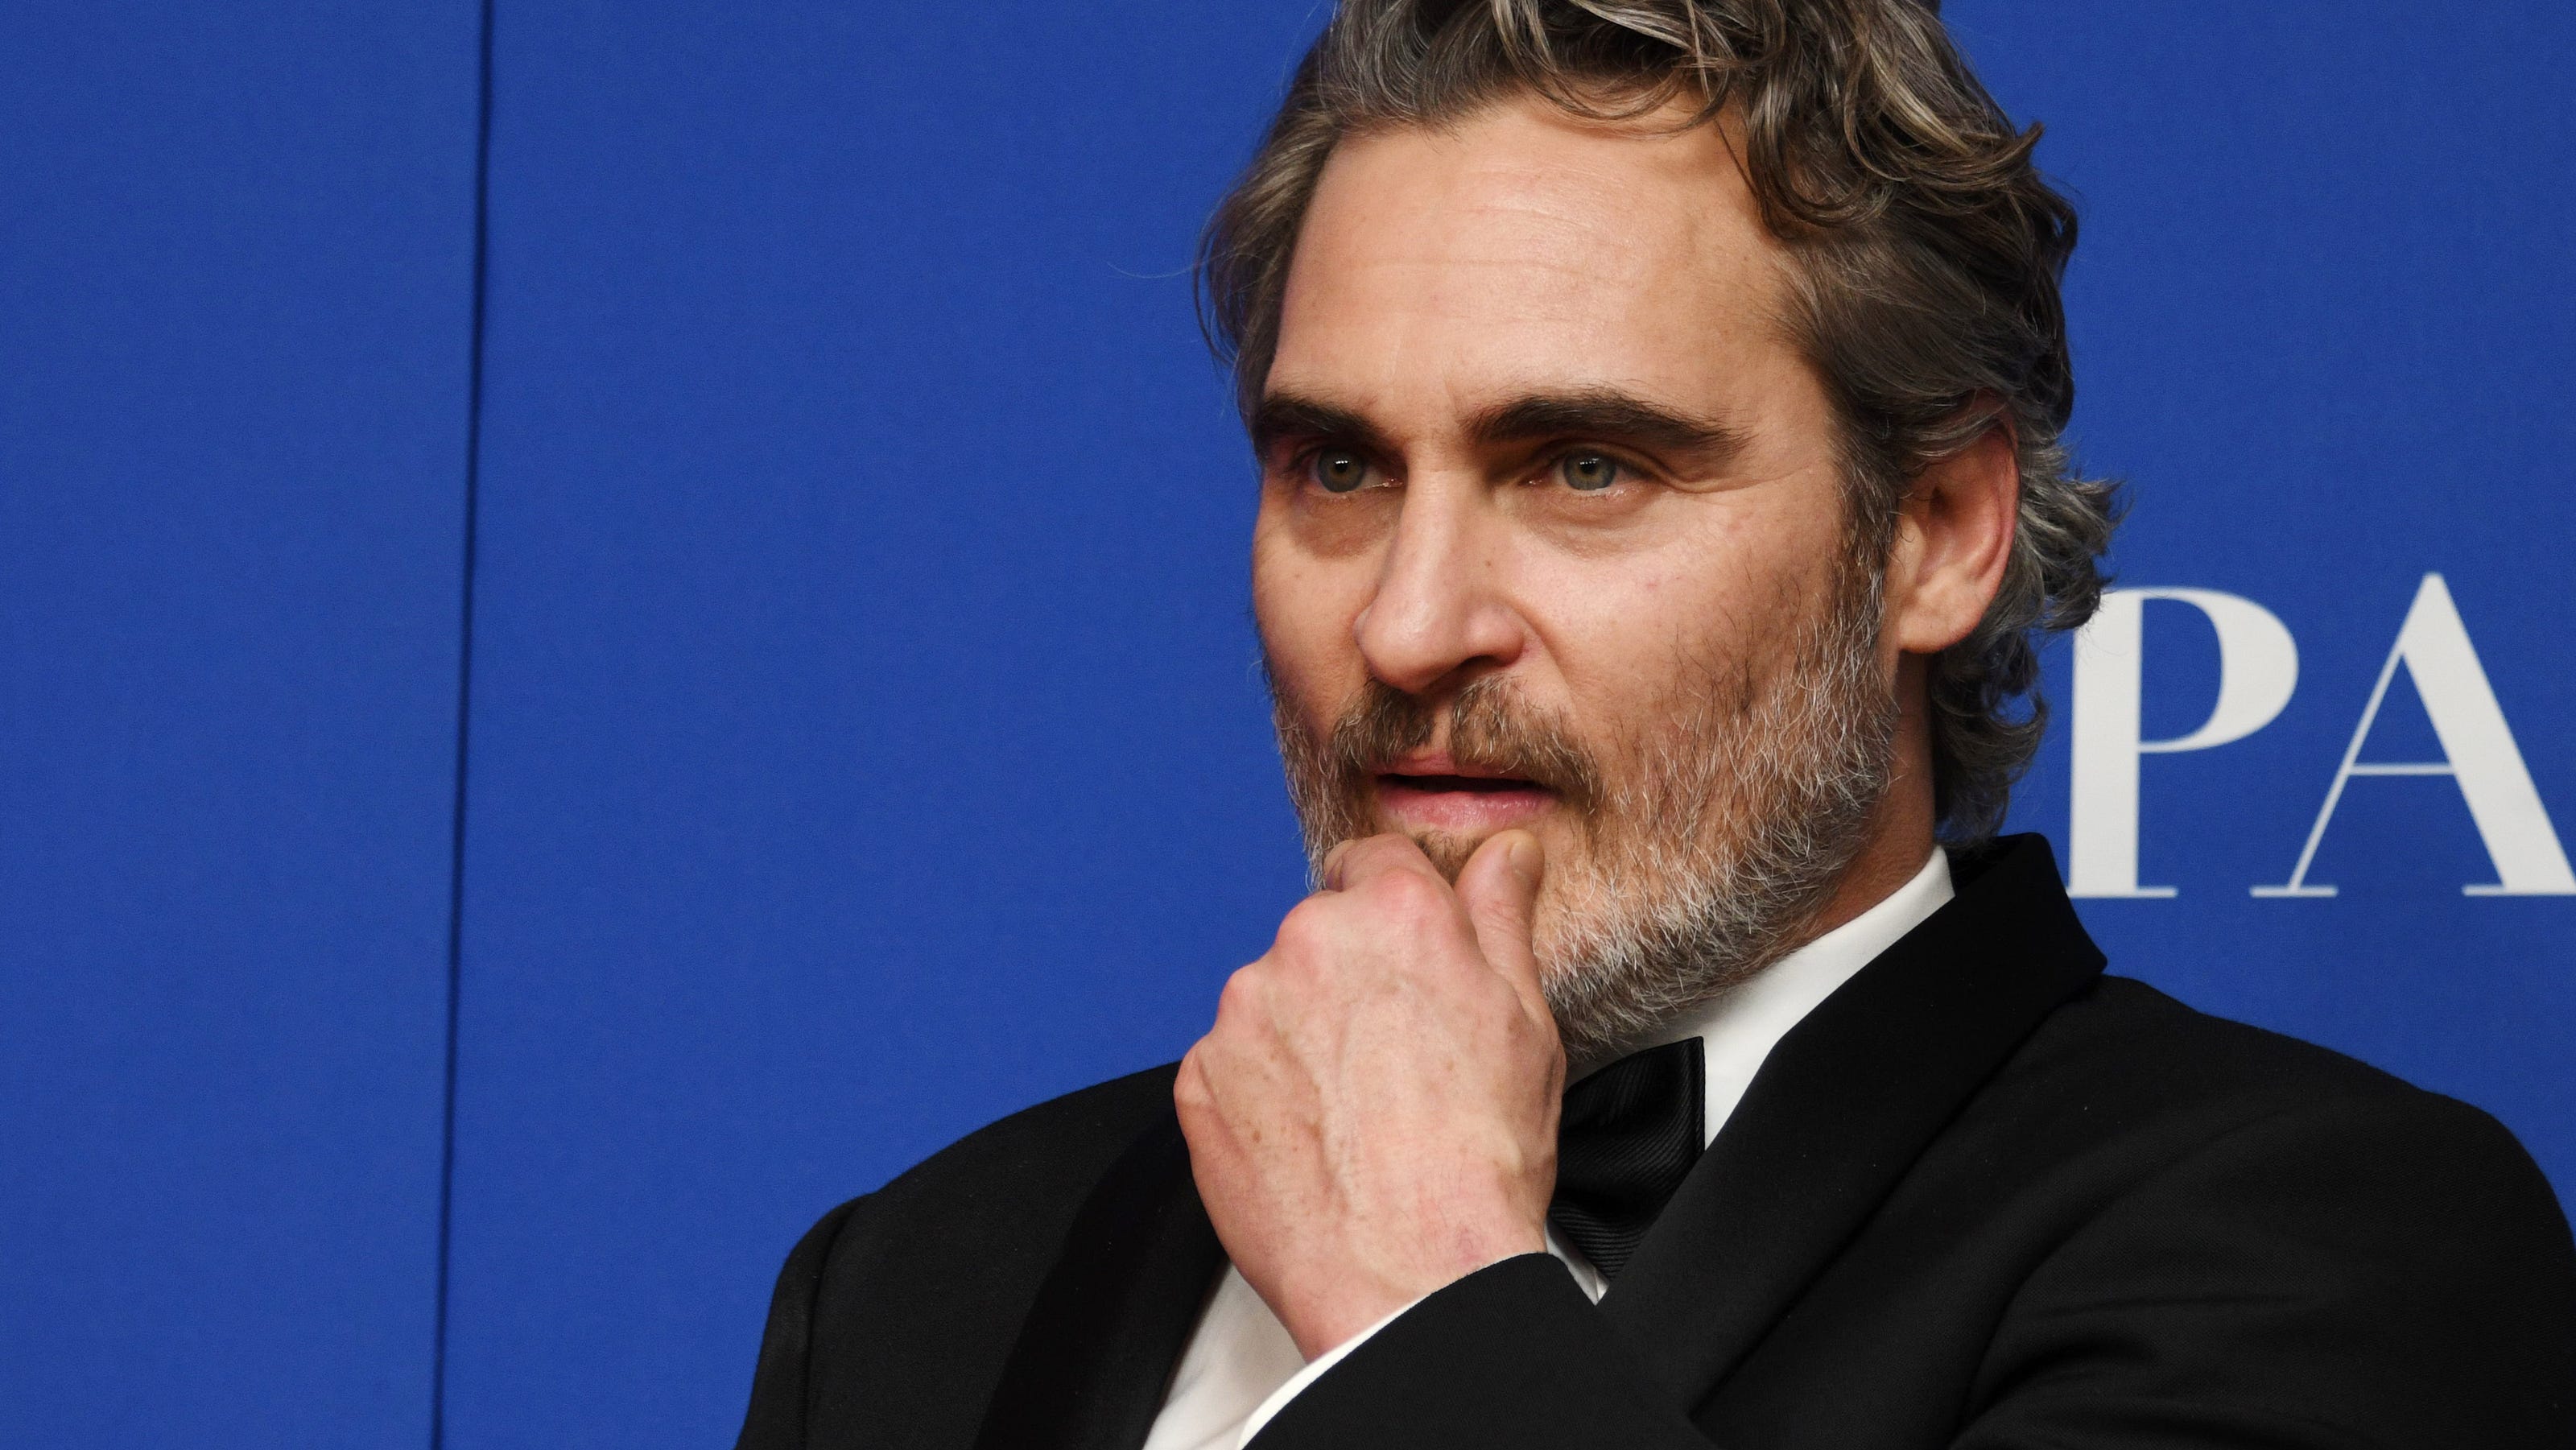 Joaquin Phoenix, fresh off Golden Globes win, arrested at Jane Fonda's climate change protest - USA TODAY